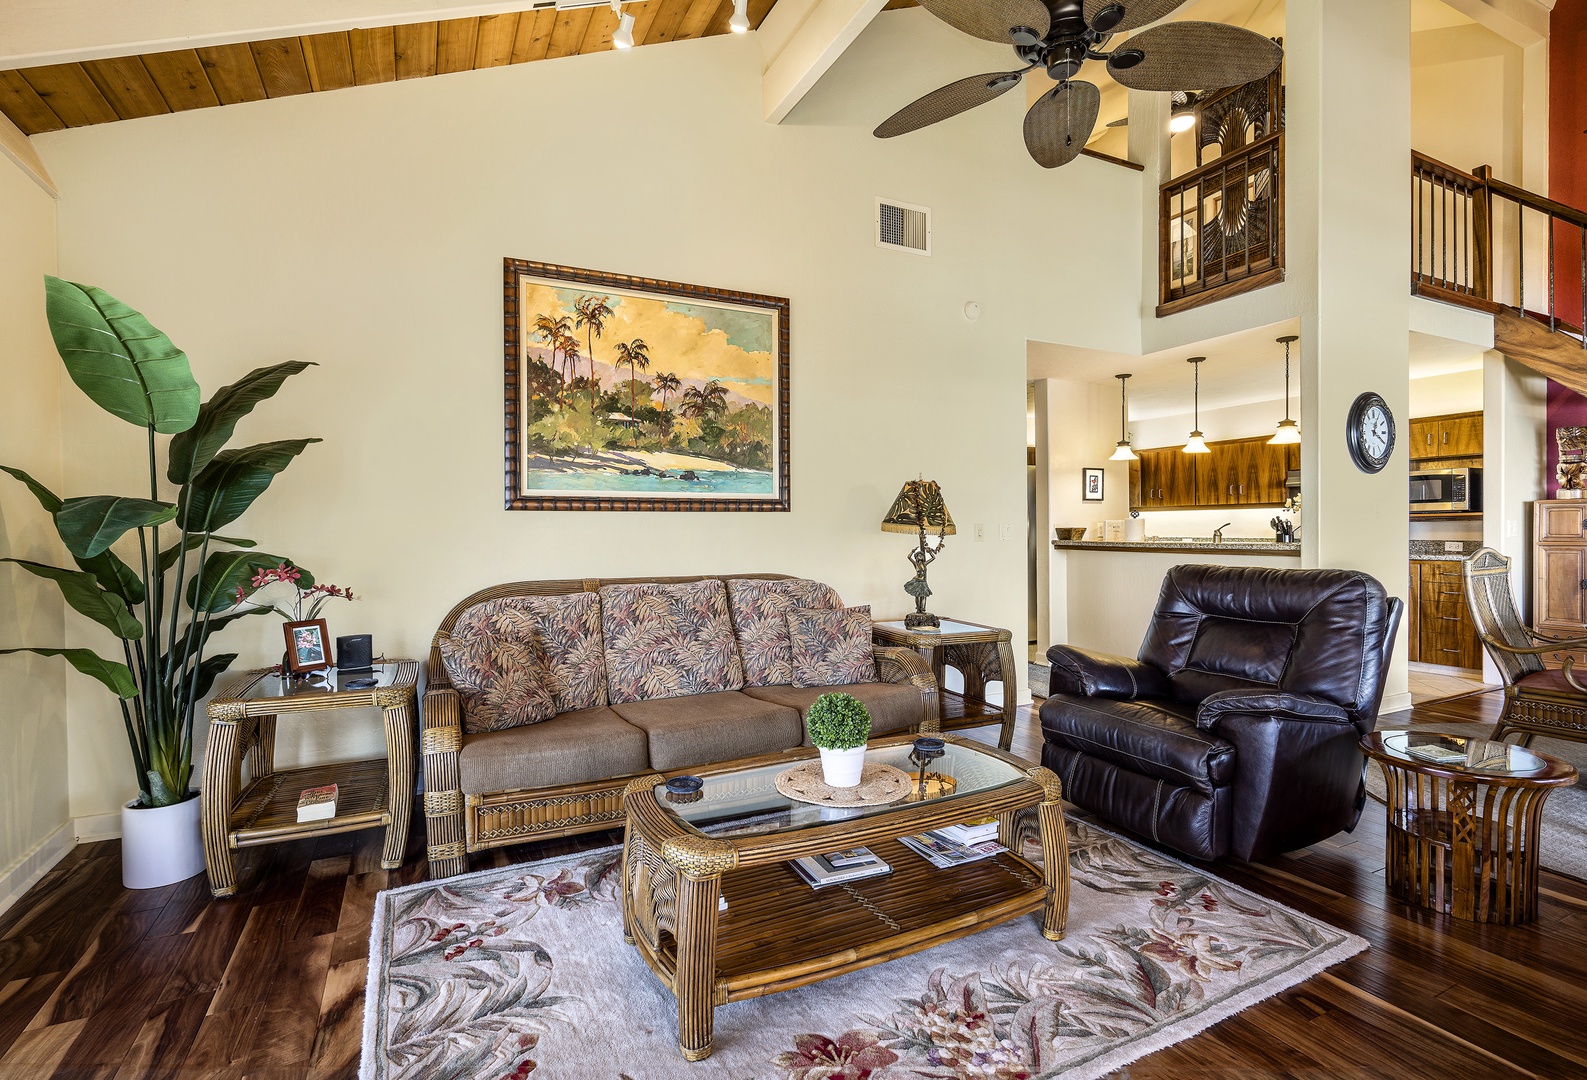 Kailua Kona Vacation Rentals, Kanaloa at Kona 3304 - Relax after a day in the sun in this air conditioned unit